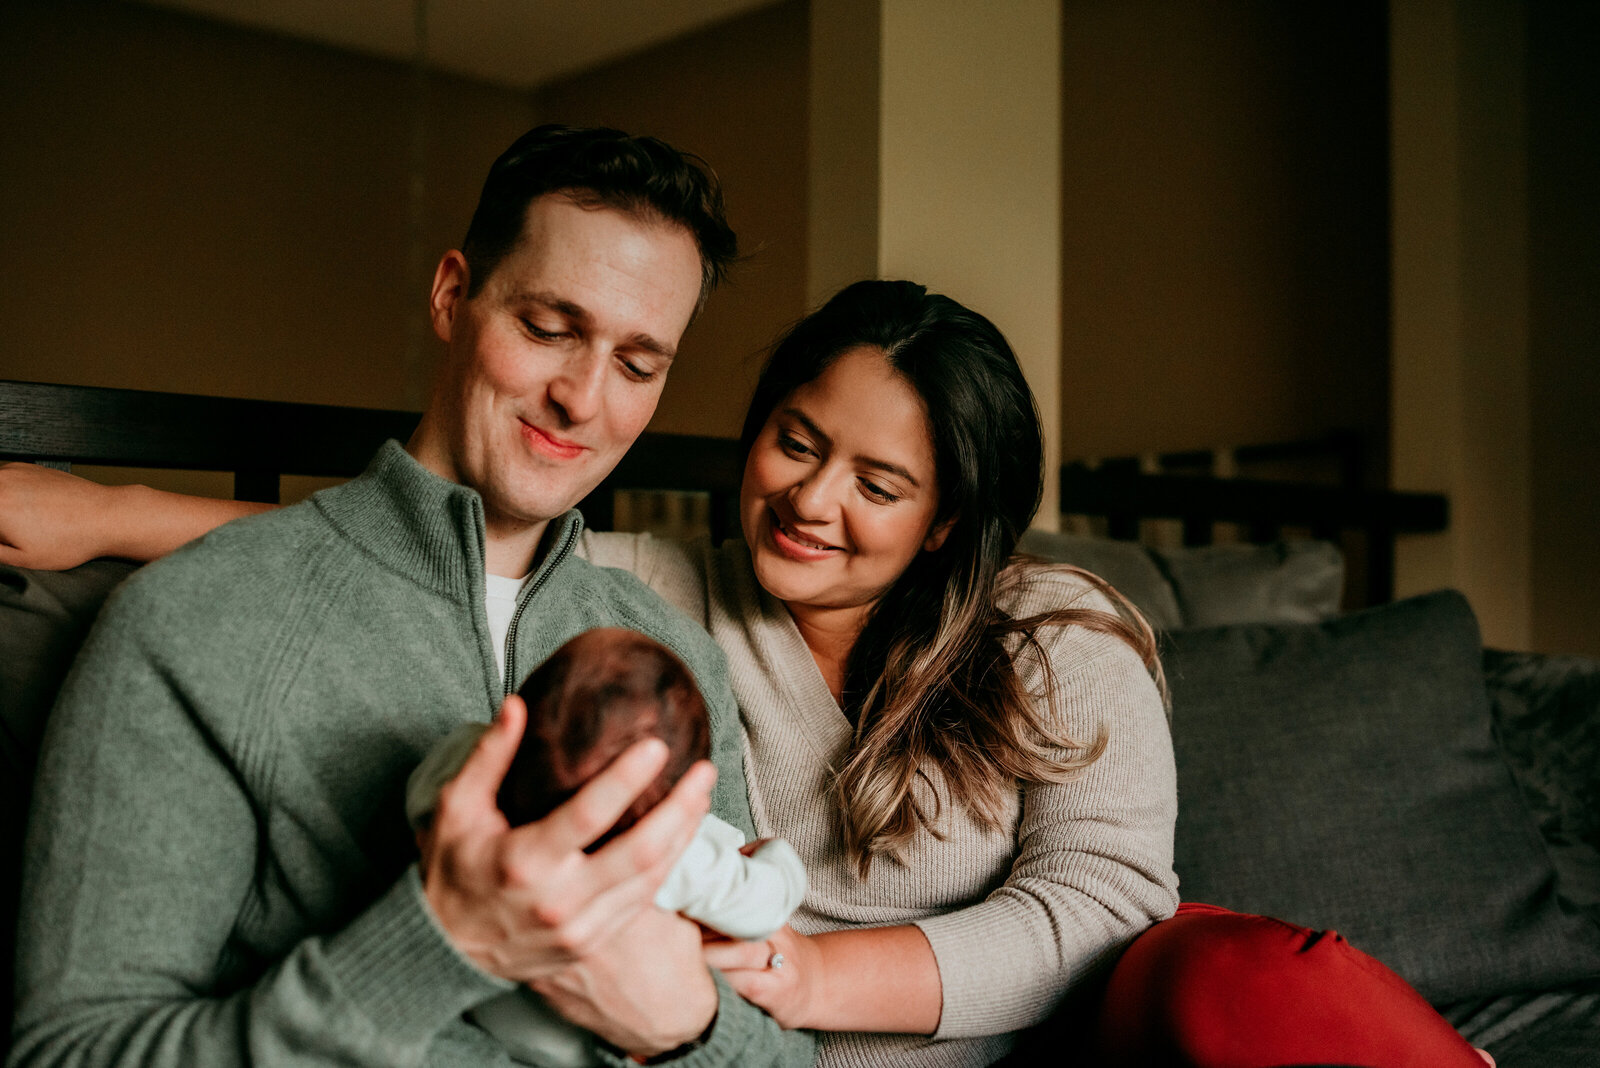 Wrap your newborn in a warm embrace in the Twin Cities. Shannon Kathleen Photography captures the magic in St. Paul or Minneapolis homes. Book your session for warmth and love